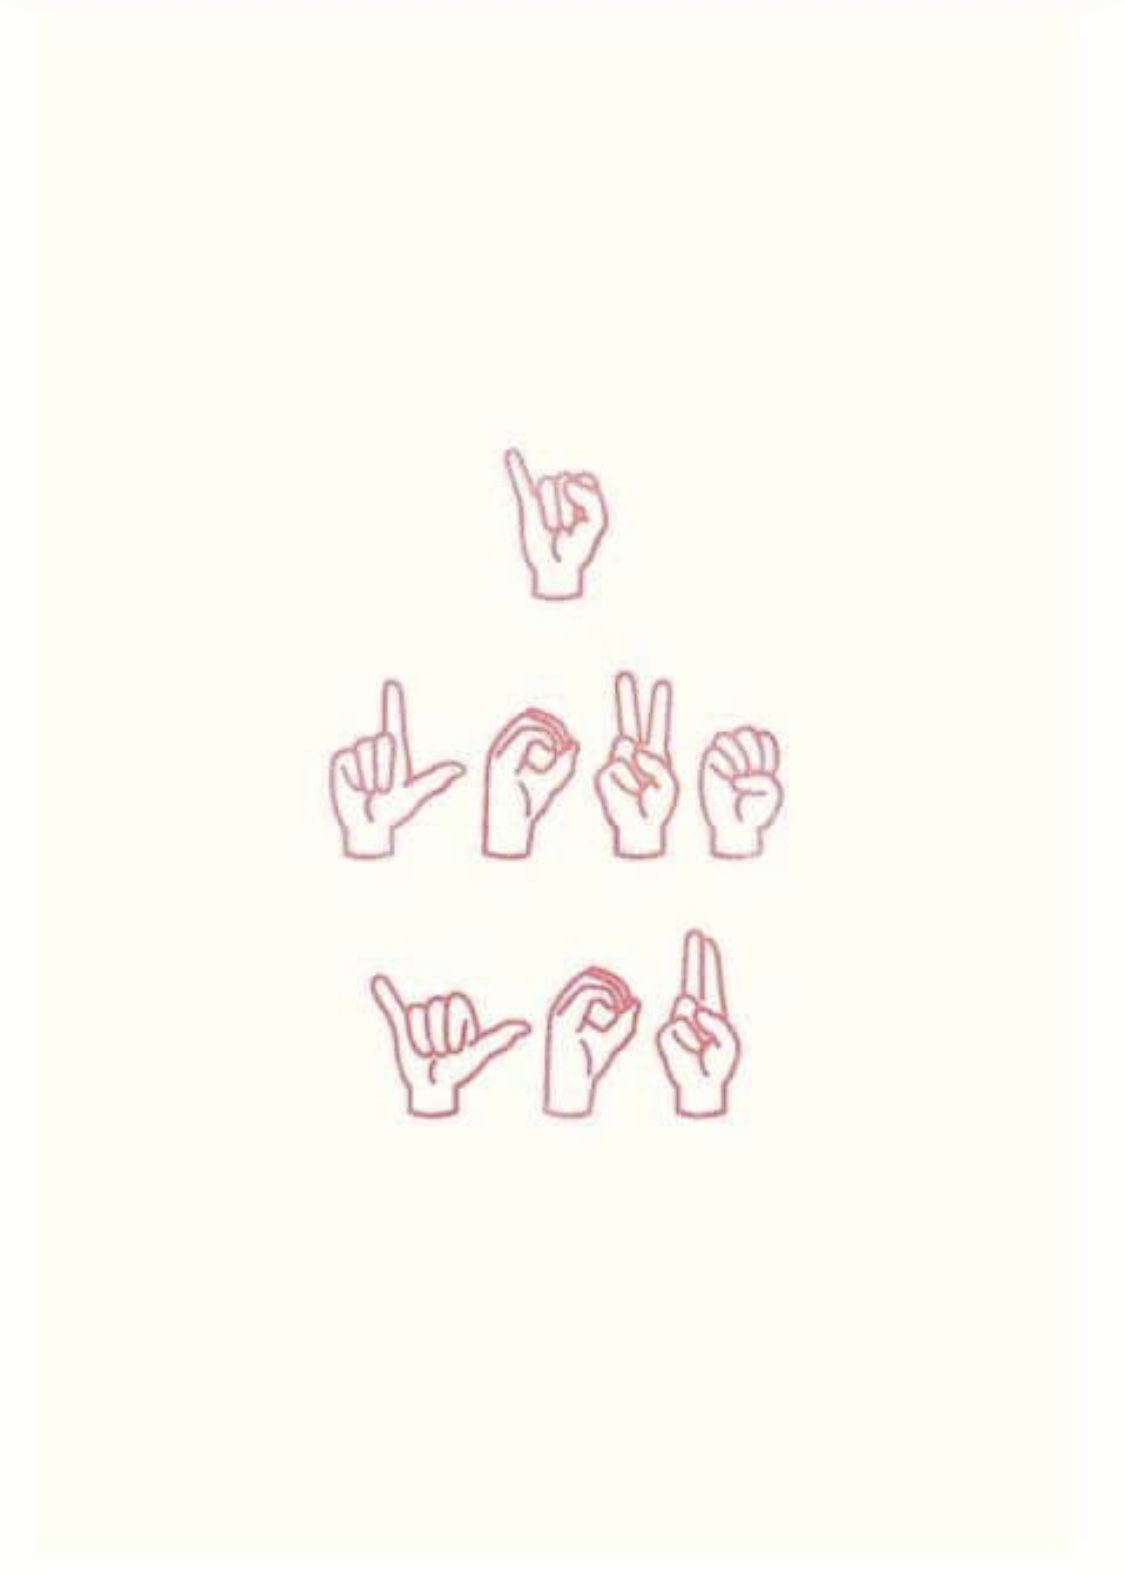 I love you” in American Sign Language. Sign language art, Sign